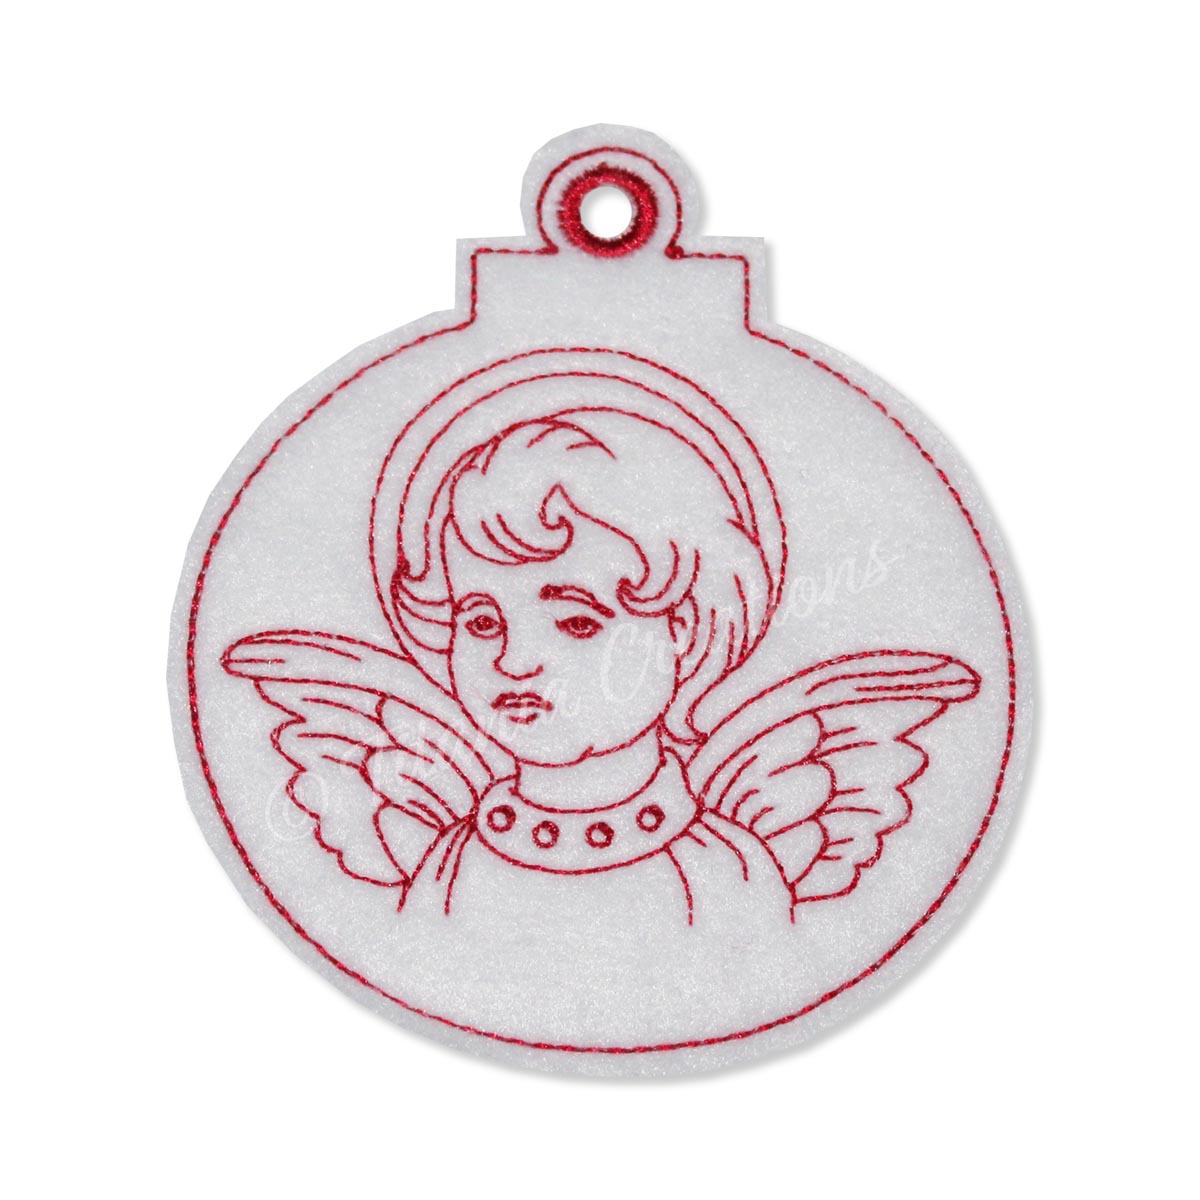 ITH Angel Bauble 4x4